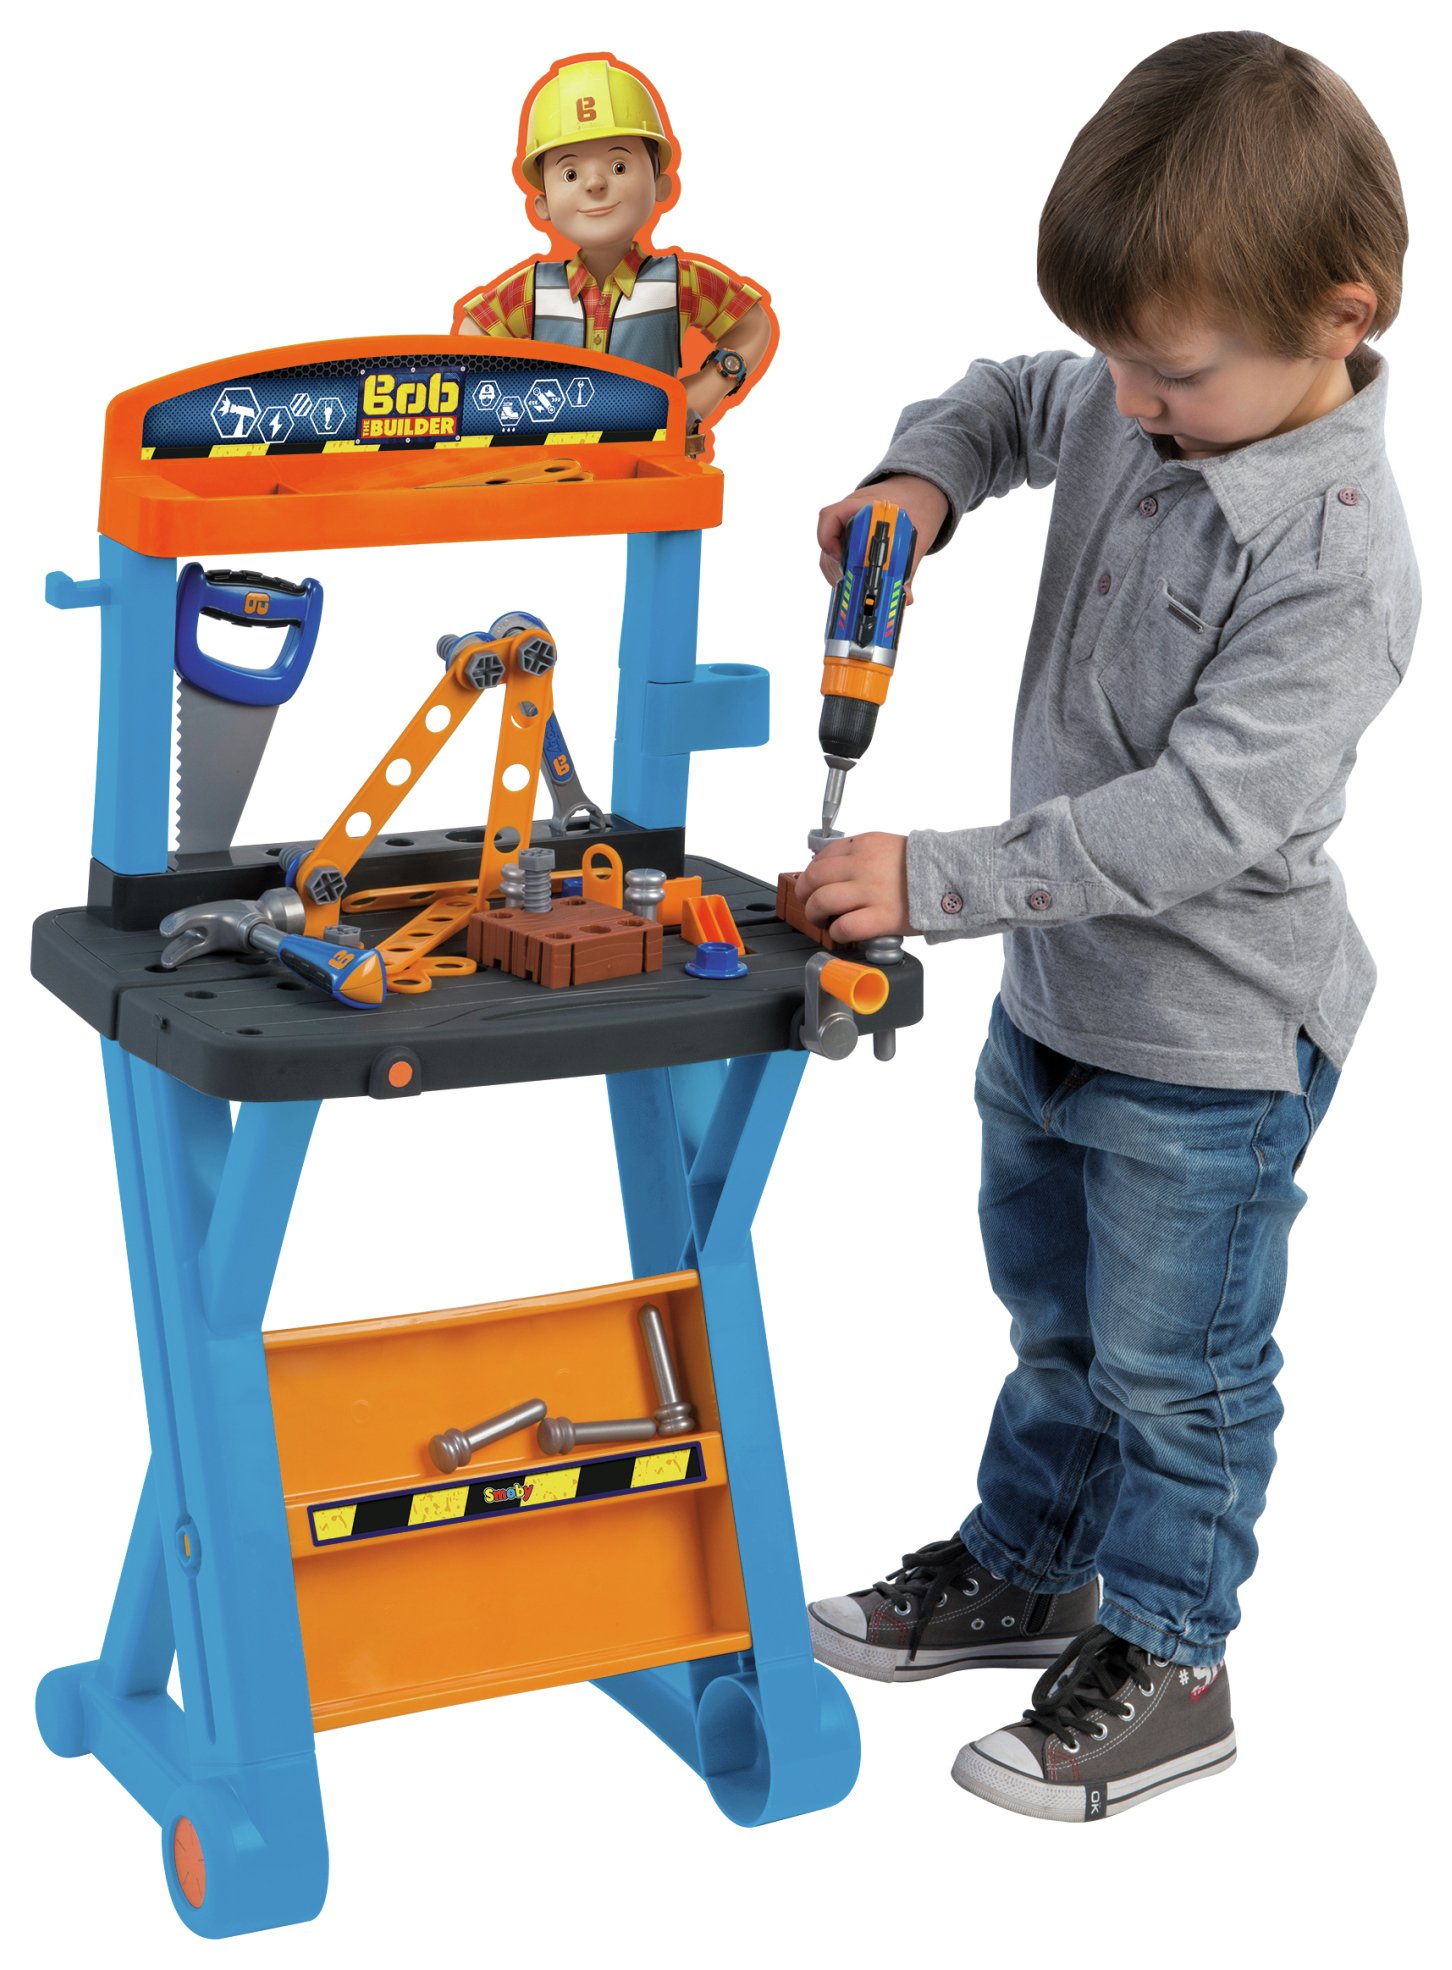 Smoby Bob The Builder My 1st Workbench. Review